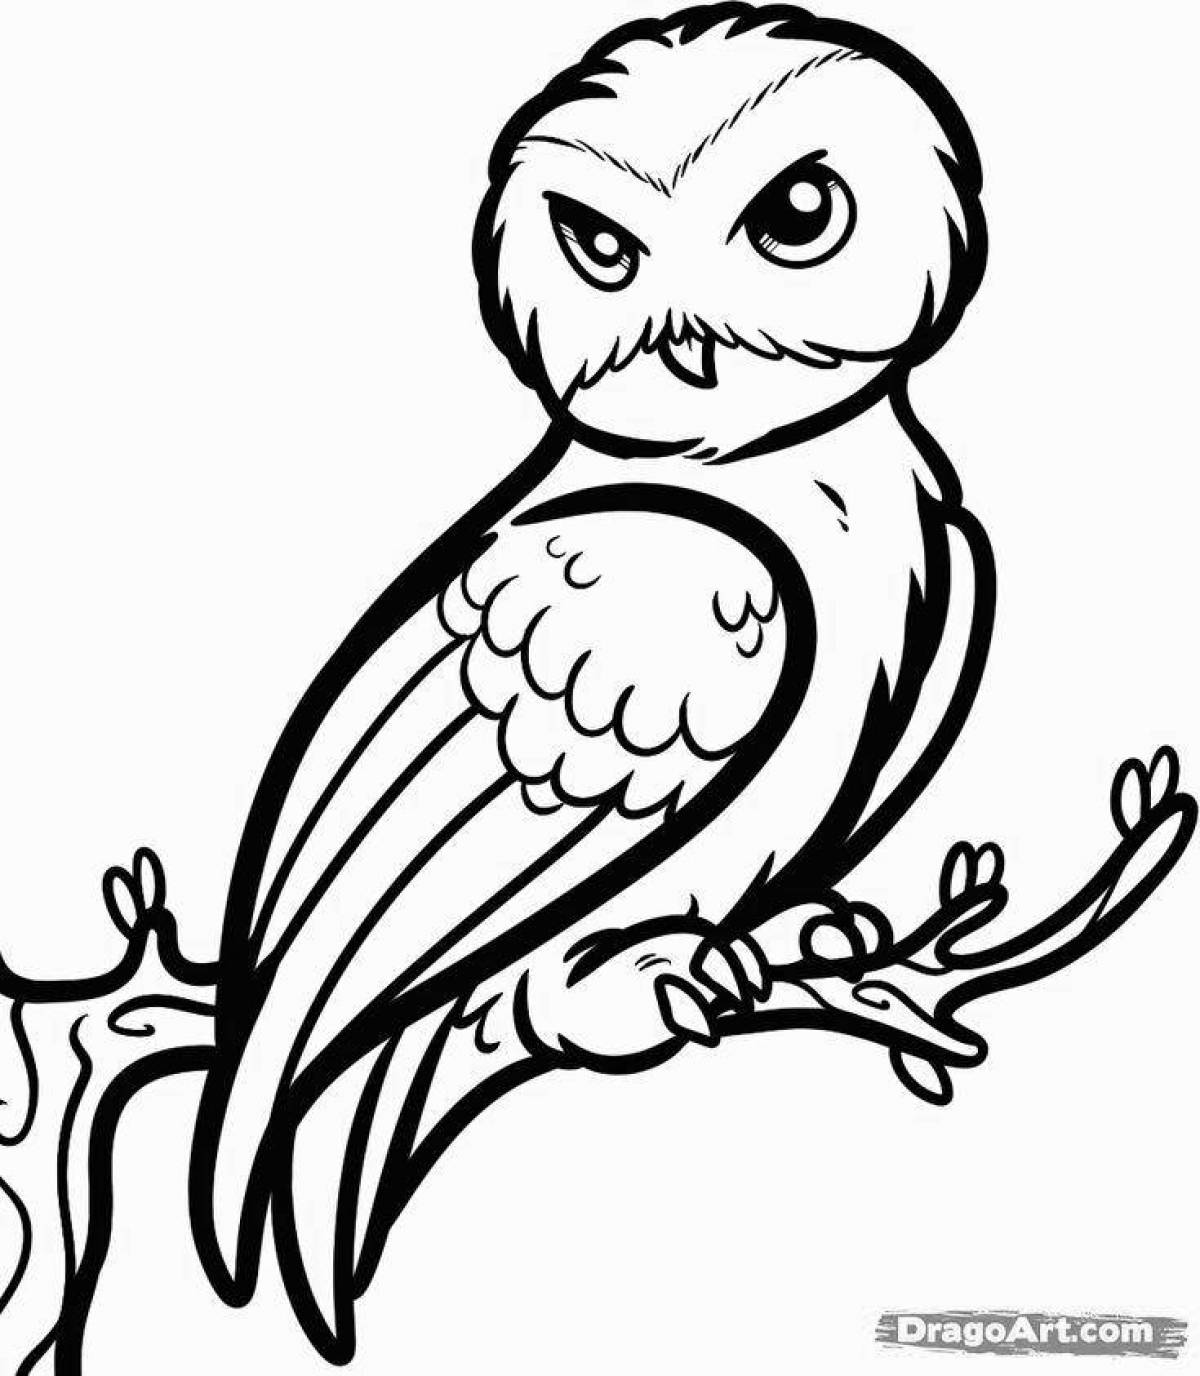 Harry Potter majestic owl coloring page